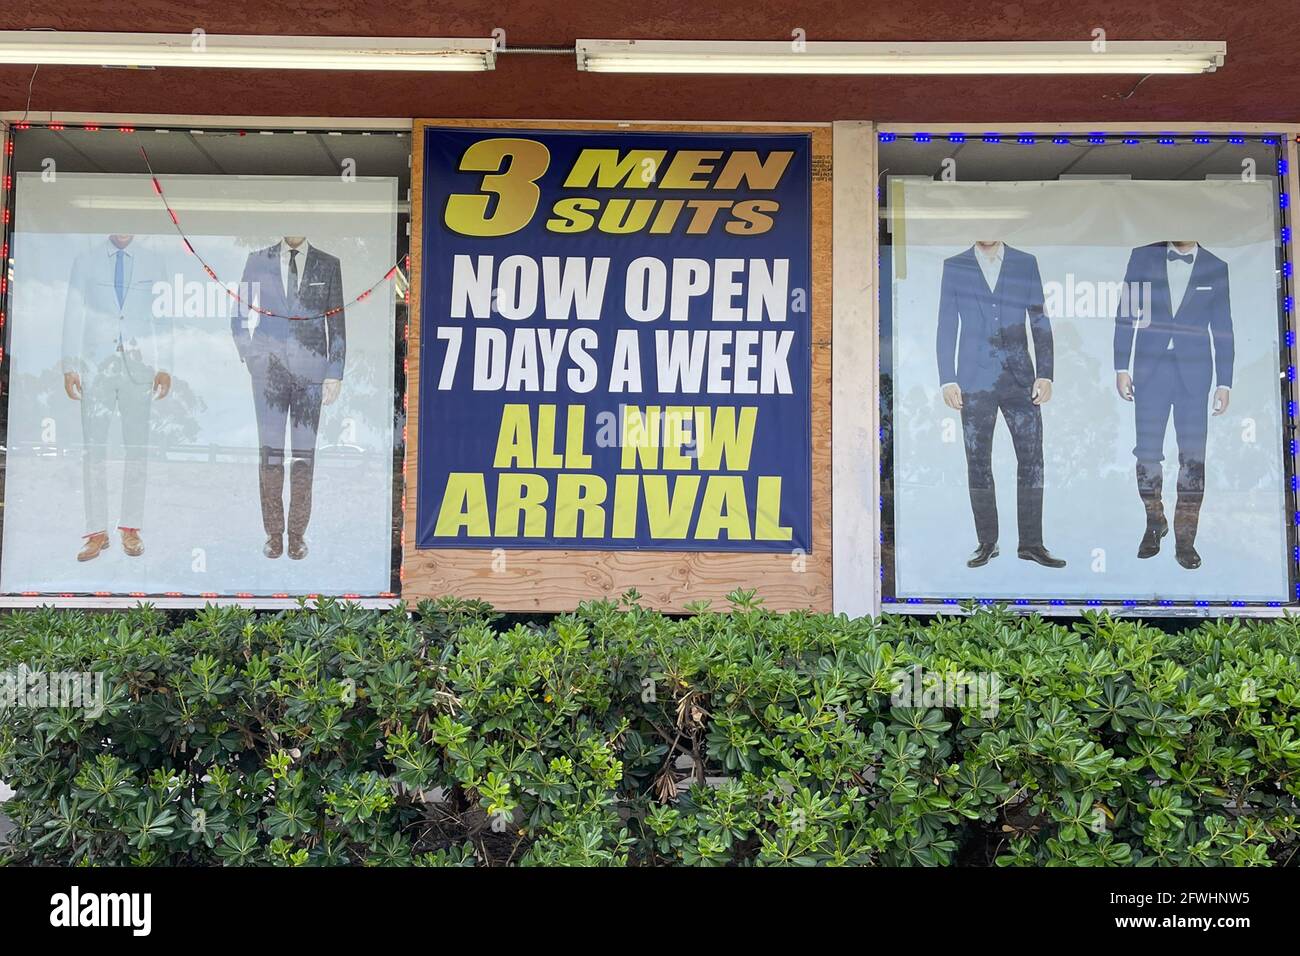 A 'Now Open 7 Days A Week' sign at 3 Men's Suits, Saturday, May 22, 2021, in Montebello, Calif. Stock Photo